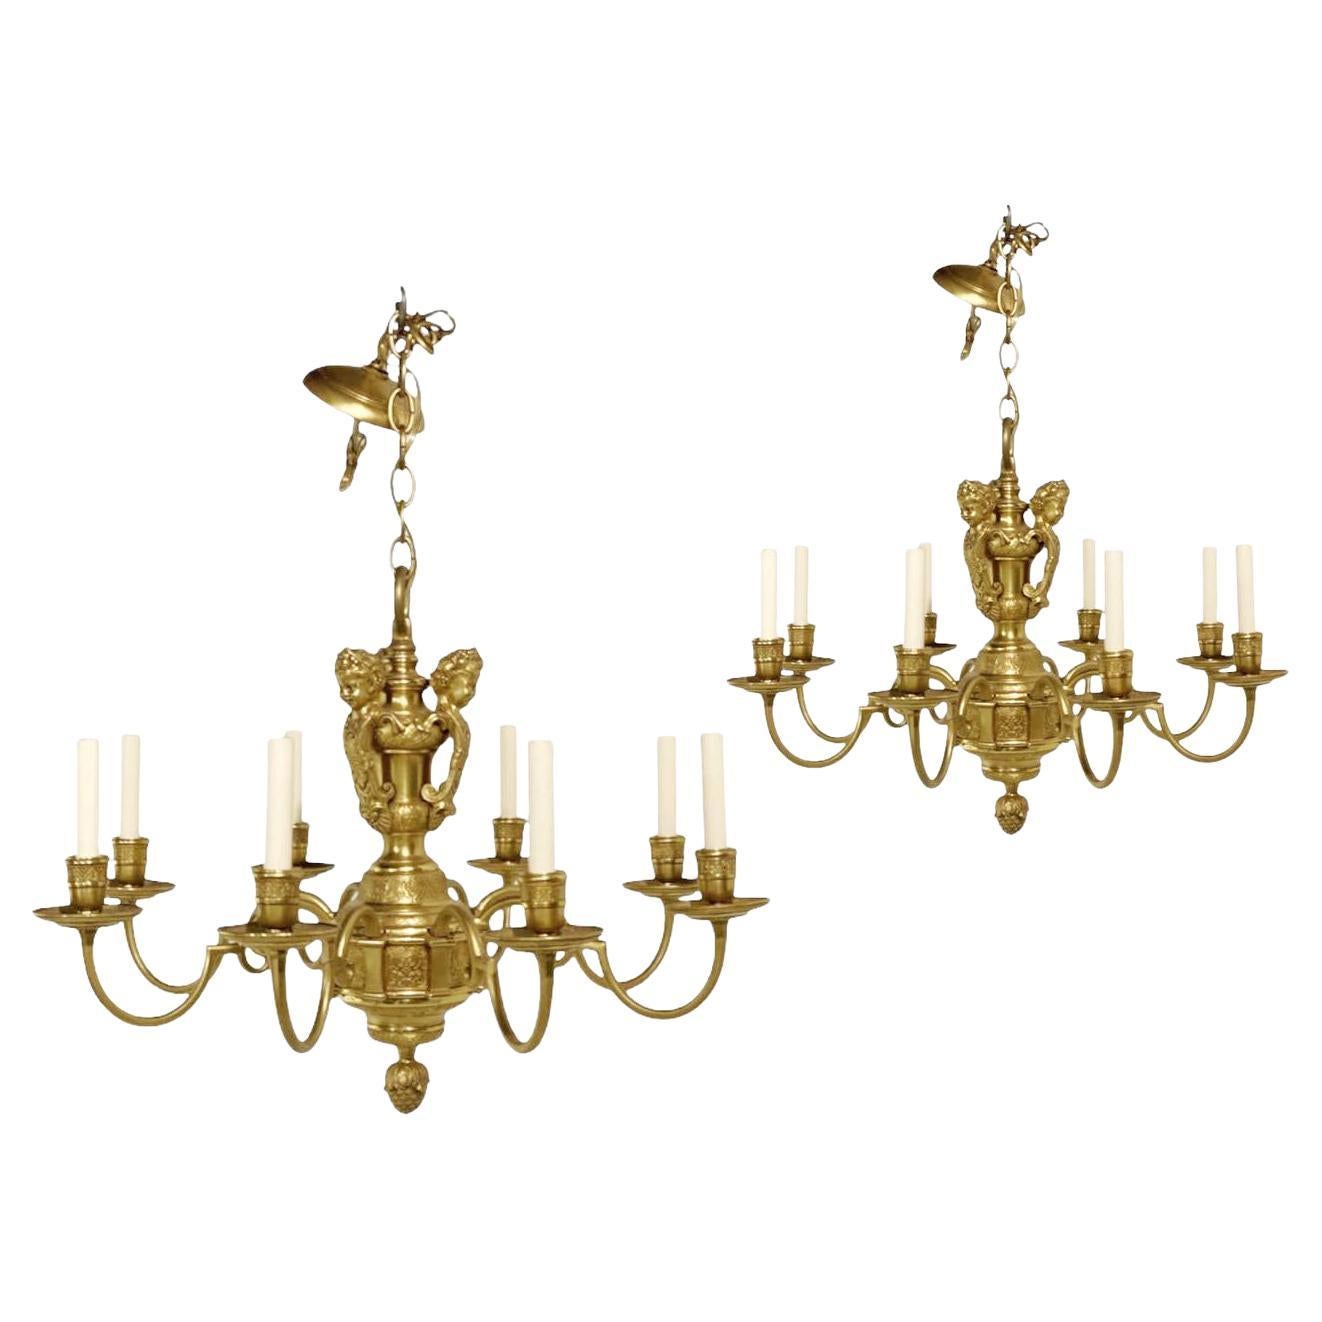 A pair of circa 1900's Caldwell Neoclassic gilt bronze chandelier with cherubs atop and engraved body. Available pair, also in one chandelier in silver finish